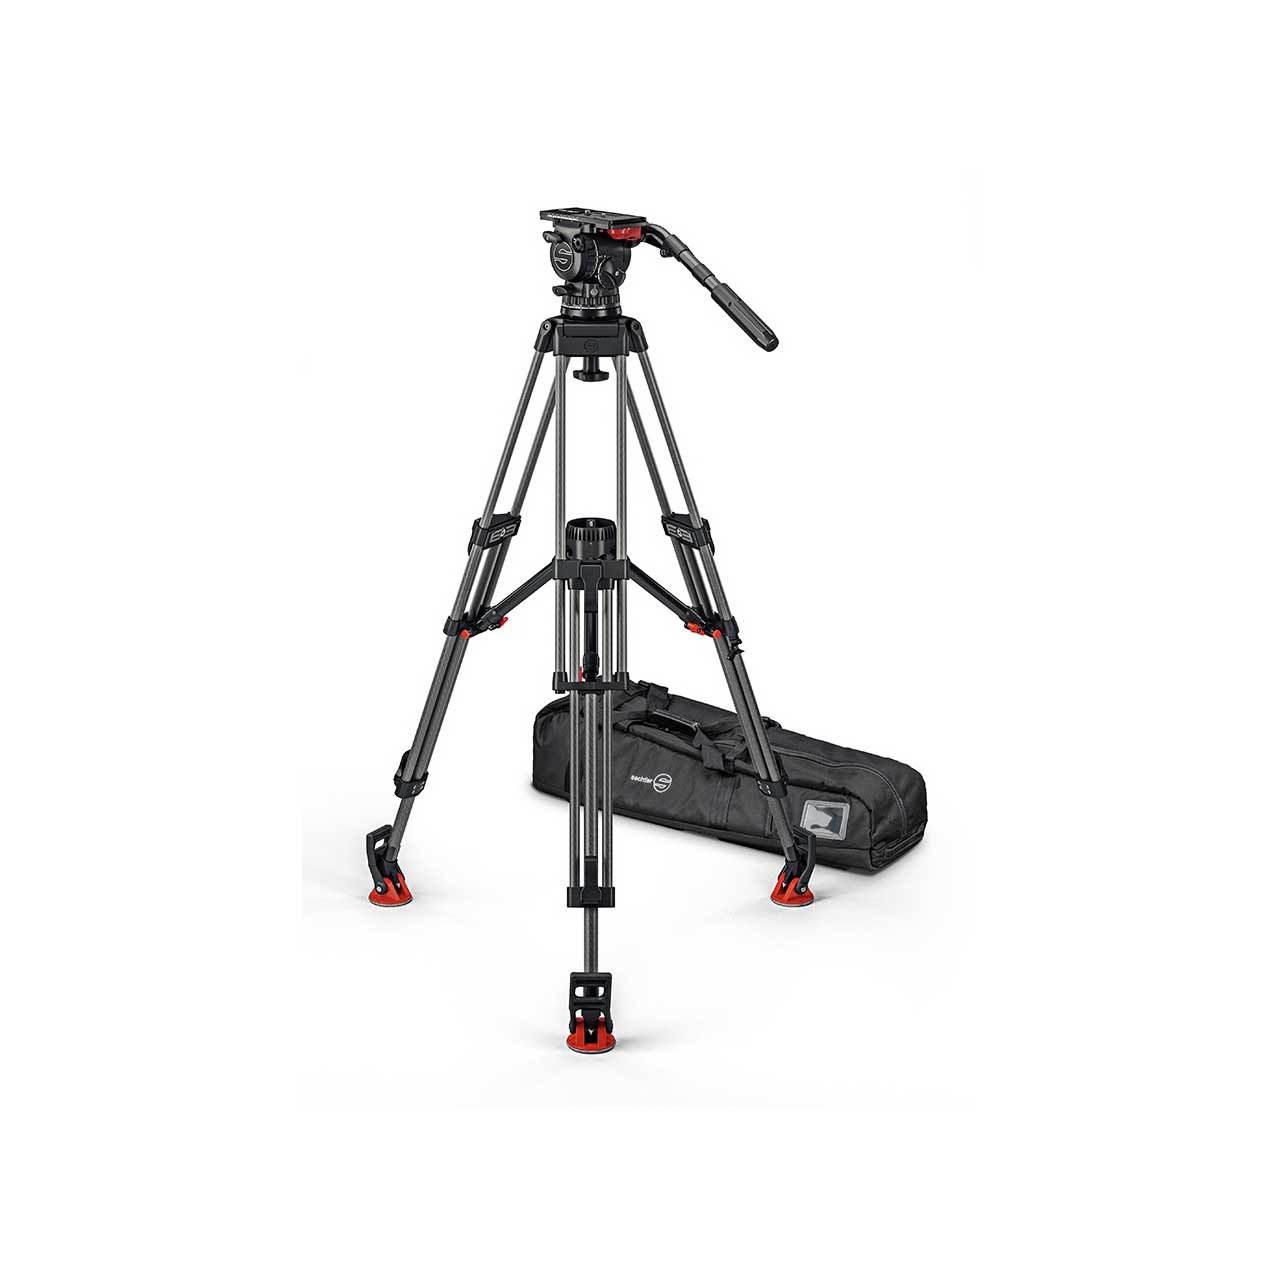 Sachtler 1443M FSB 14T Mk II 100mm Touch&Go Head / ENG 2 CF Tripod System for Payloads up to 35.3 lbs 1443M FSB 14T MK II